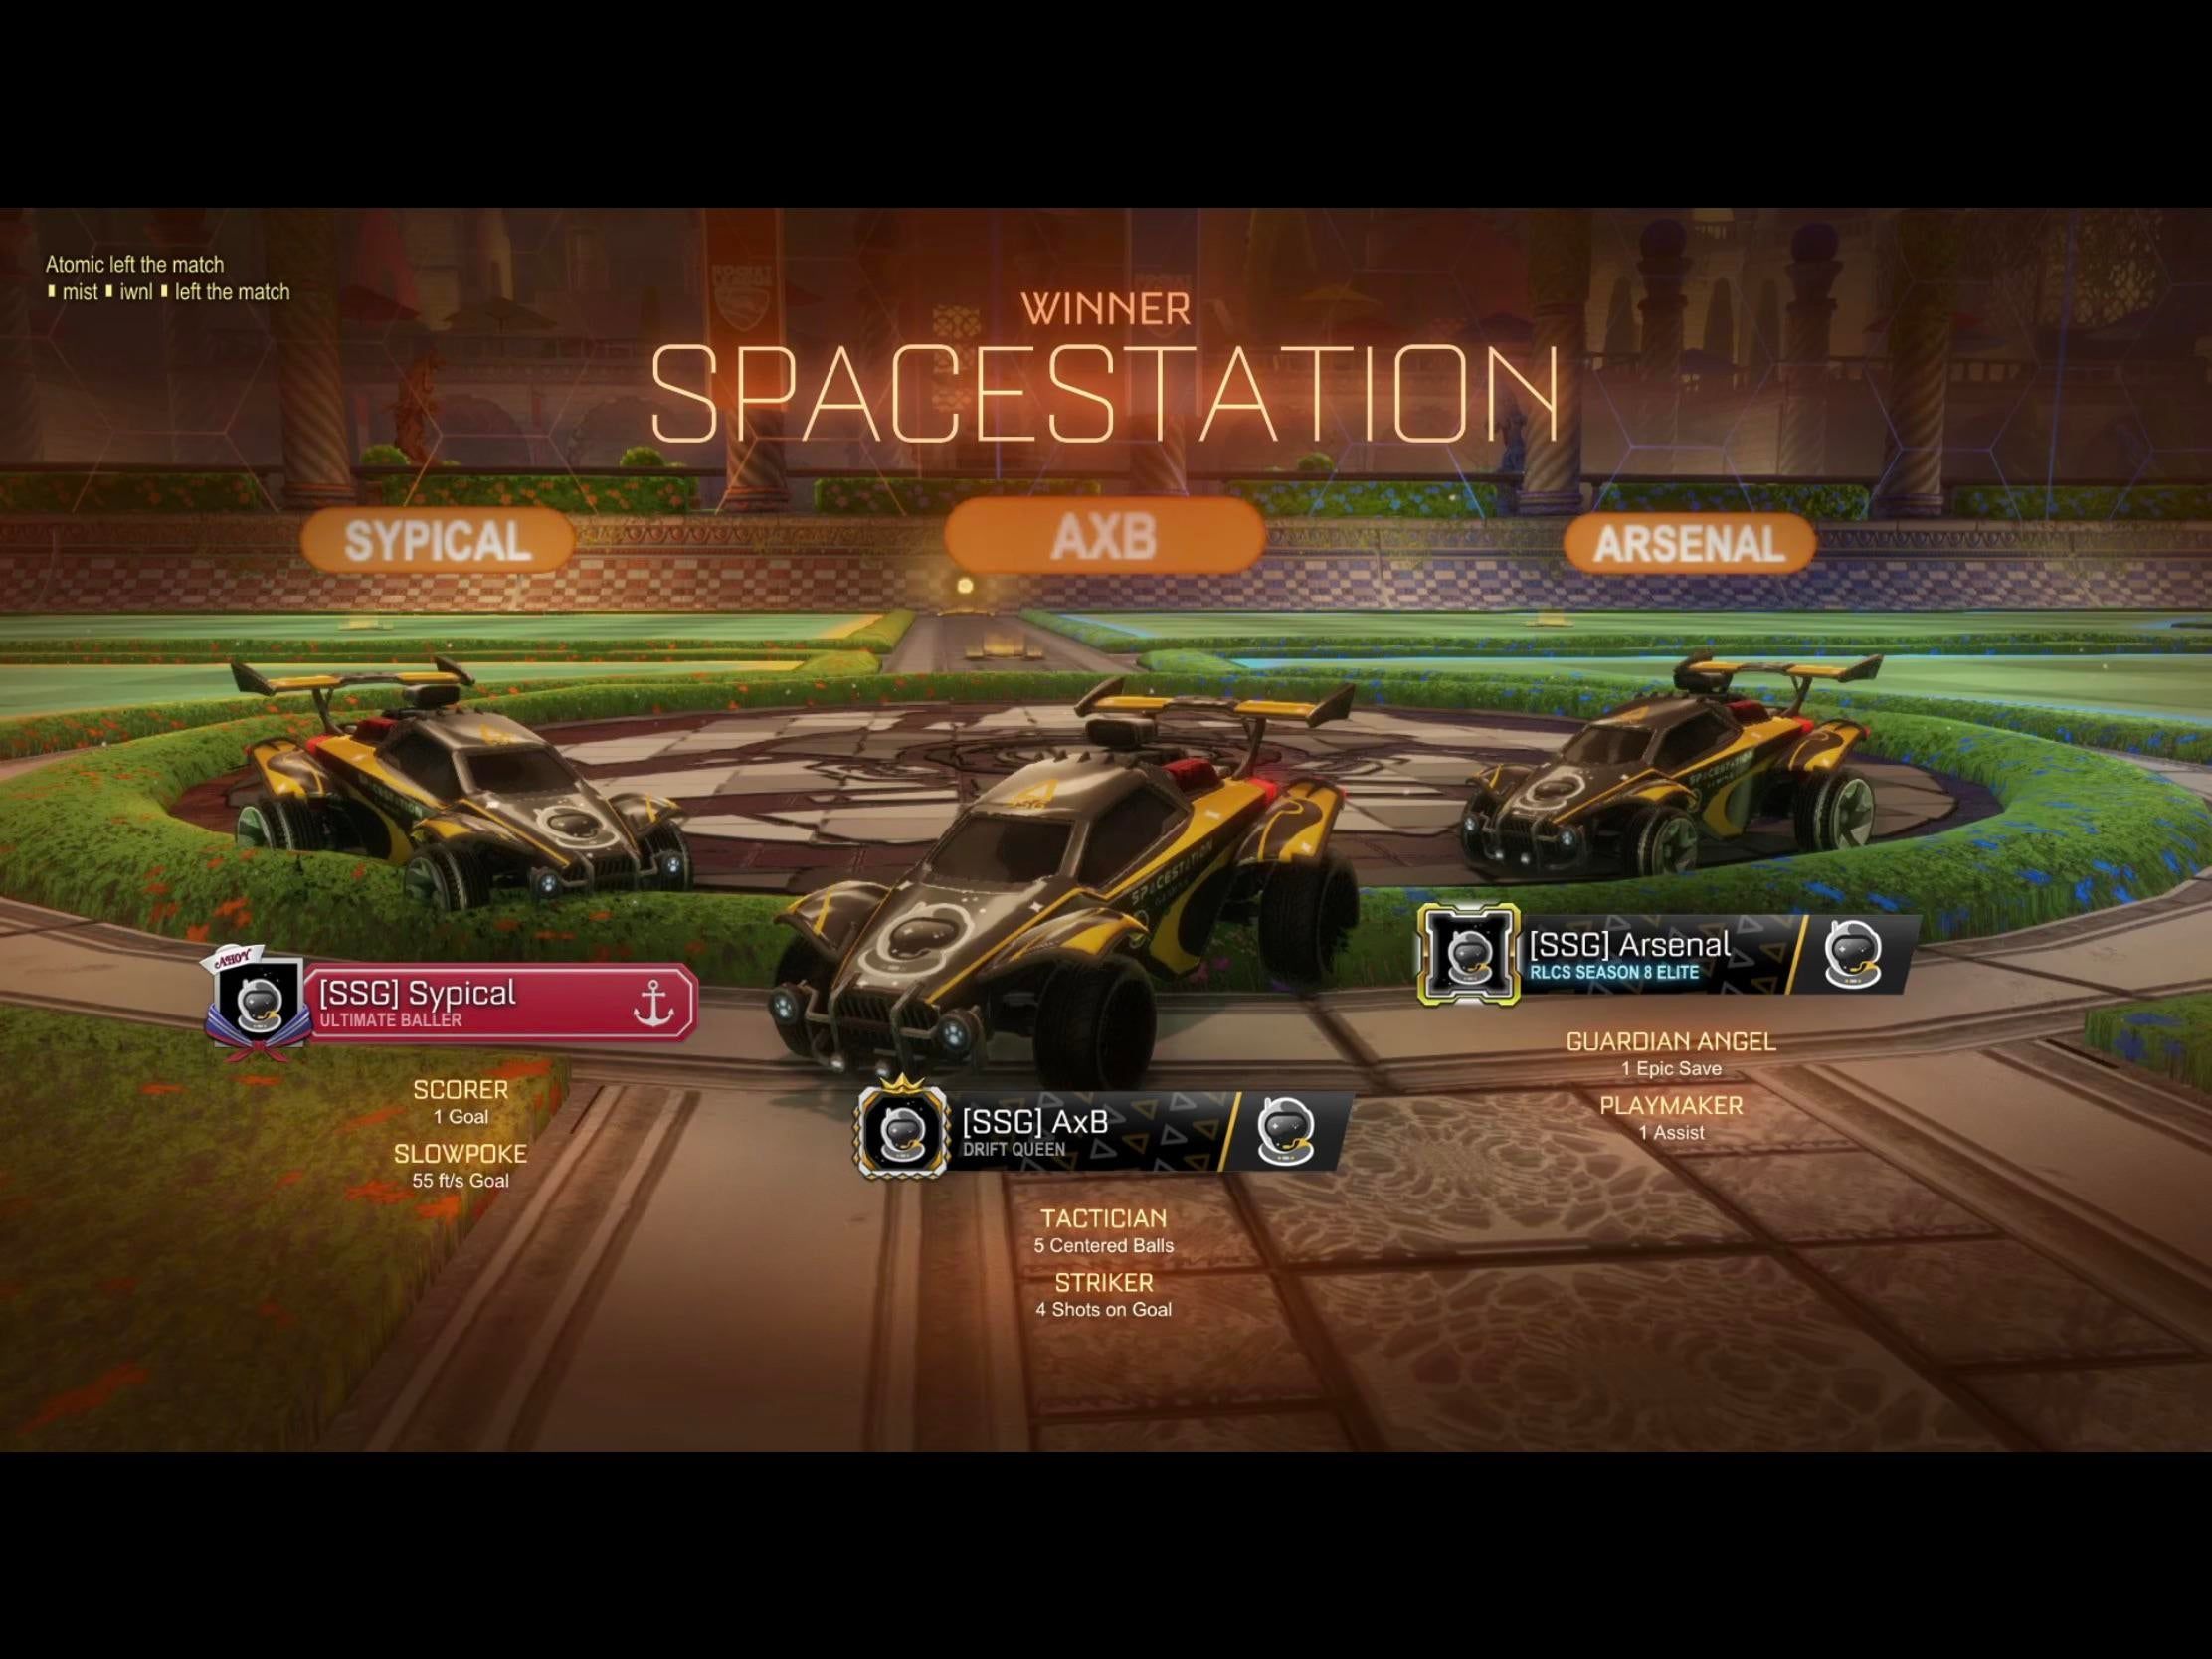 Appreciation Post for Spacestation Gaming, the only team to consistently sport their decal